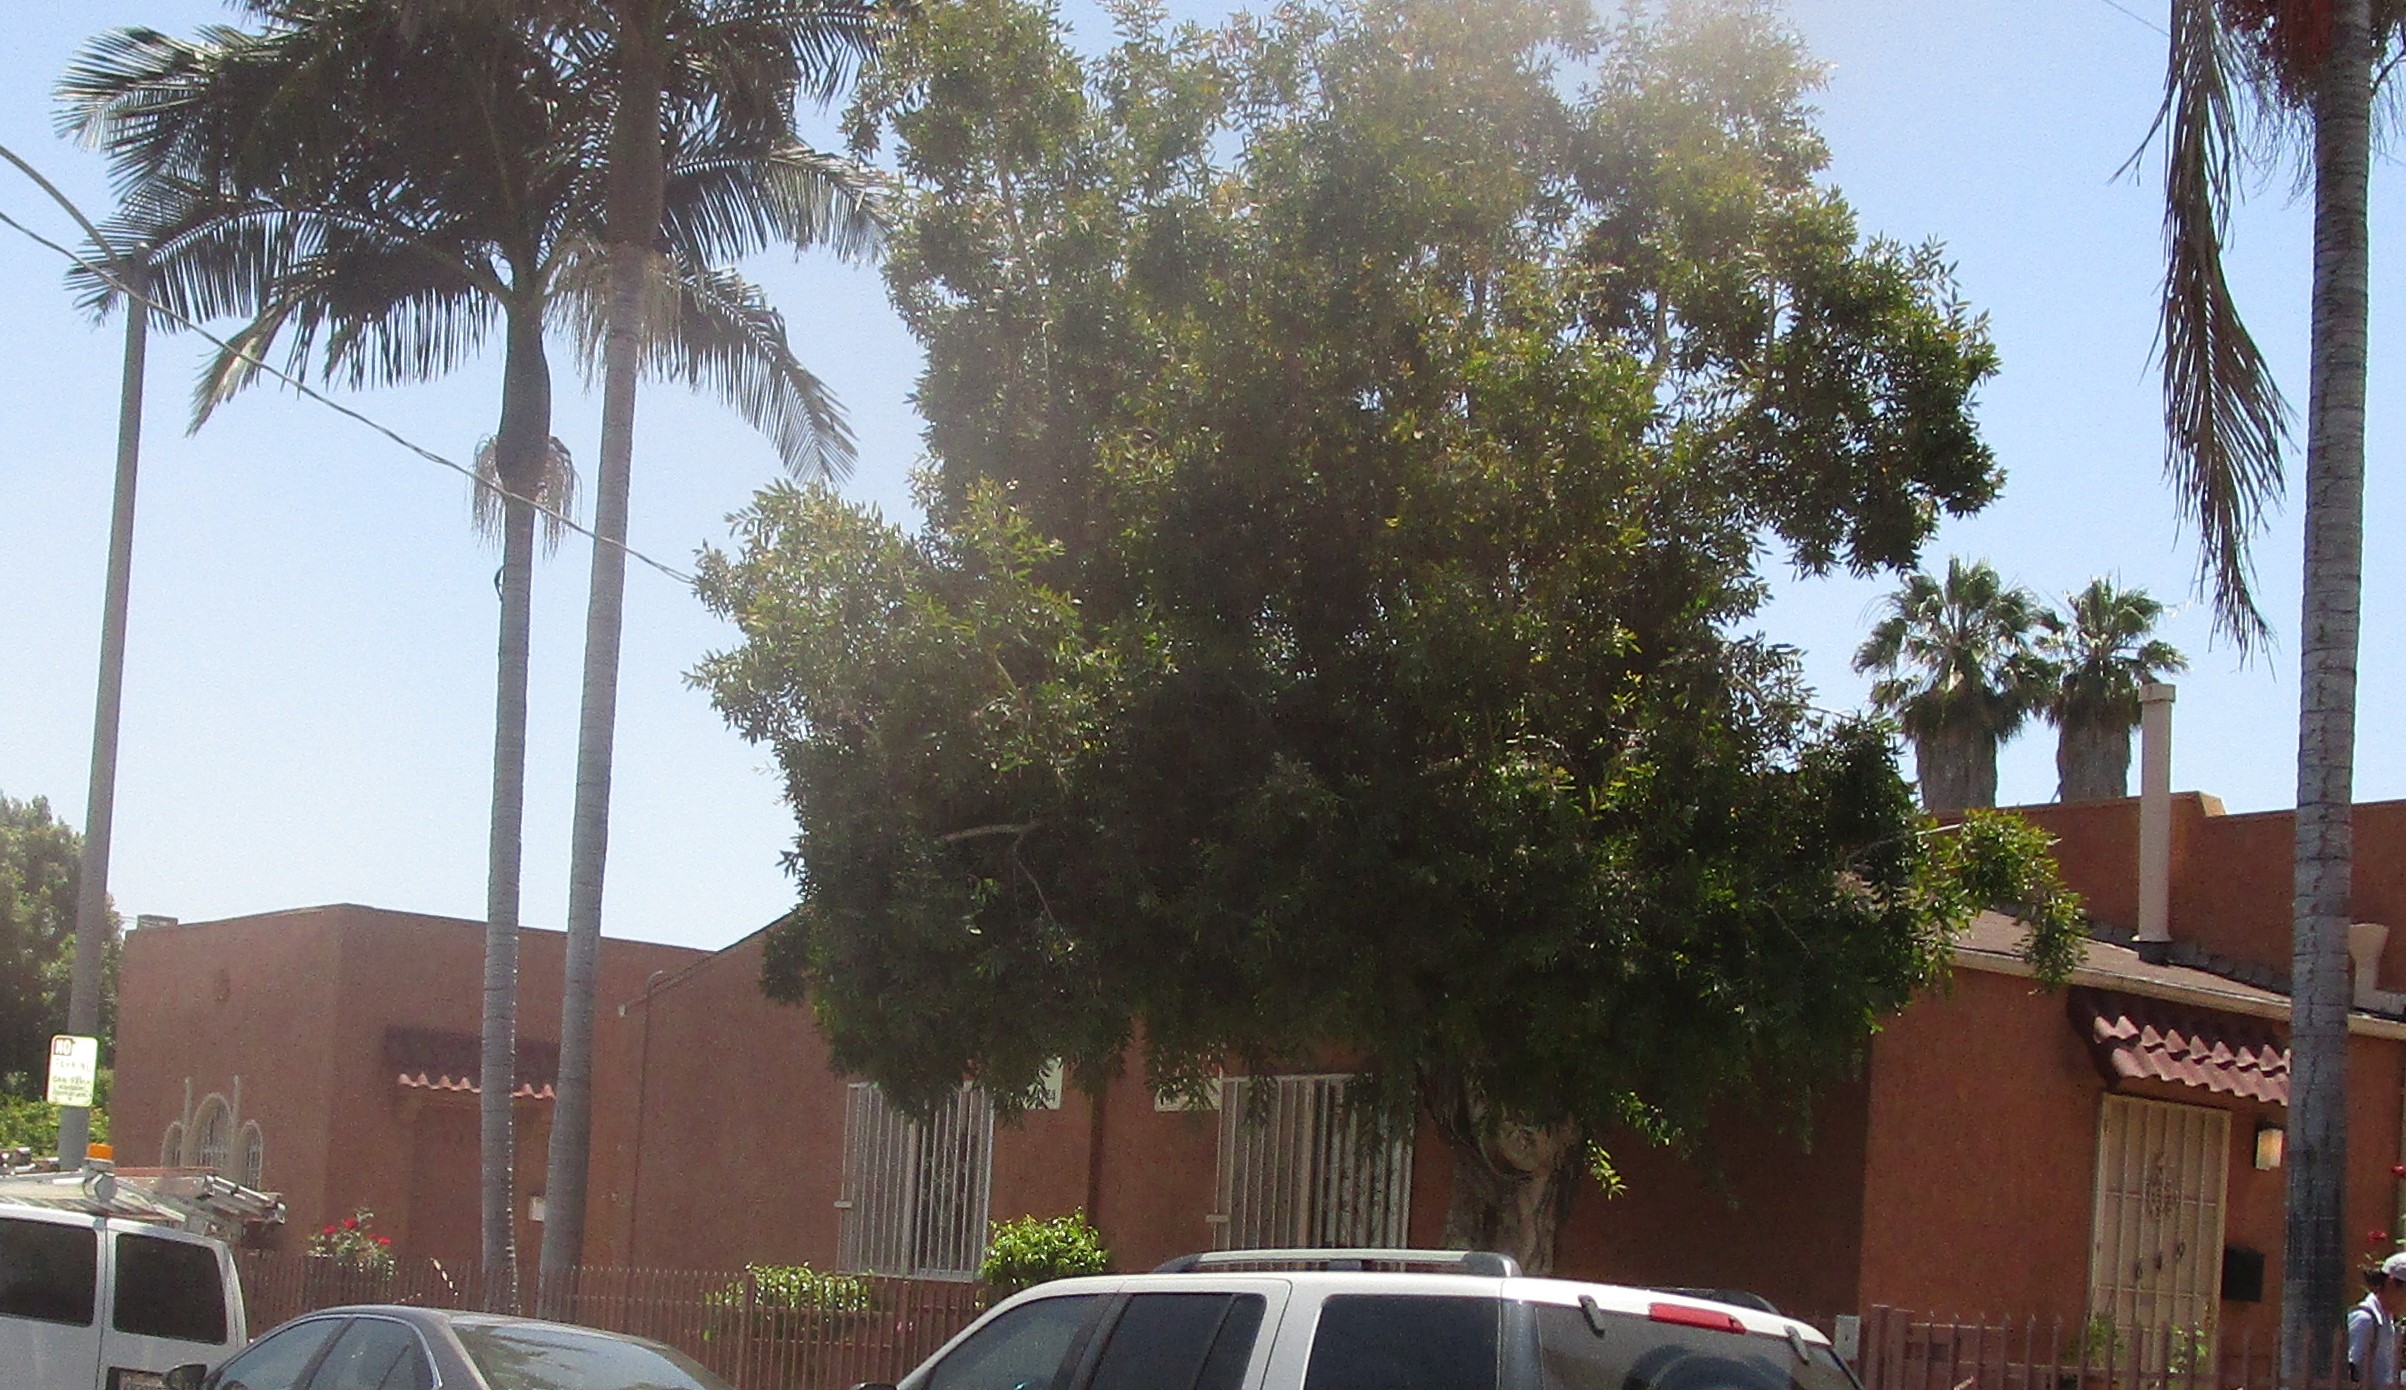 Side view of a courtyard style brick color building, all gated including windows, Iron screen door, palm and tall trees, parked cars in front, passing by person.